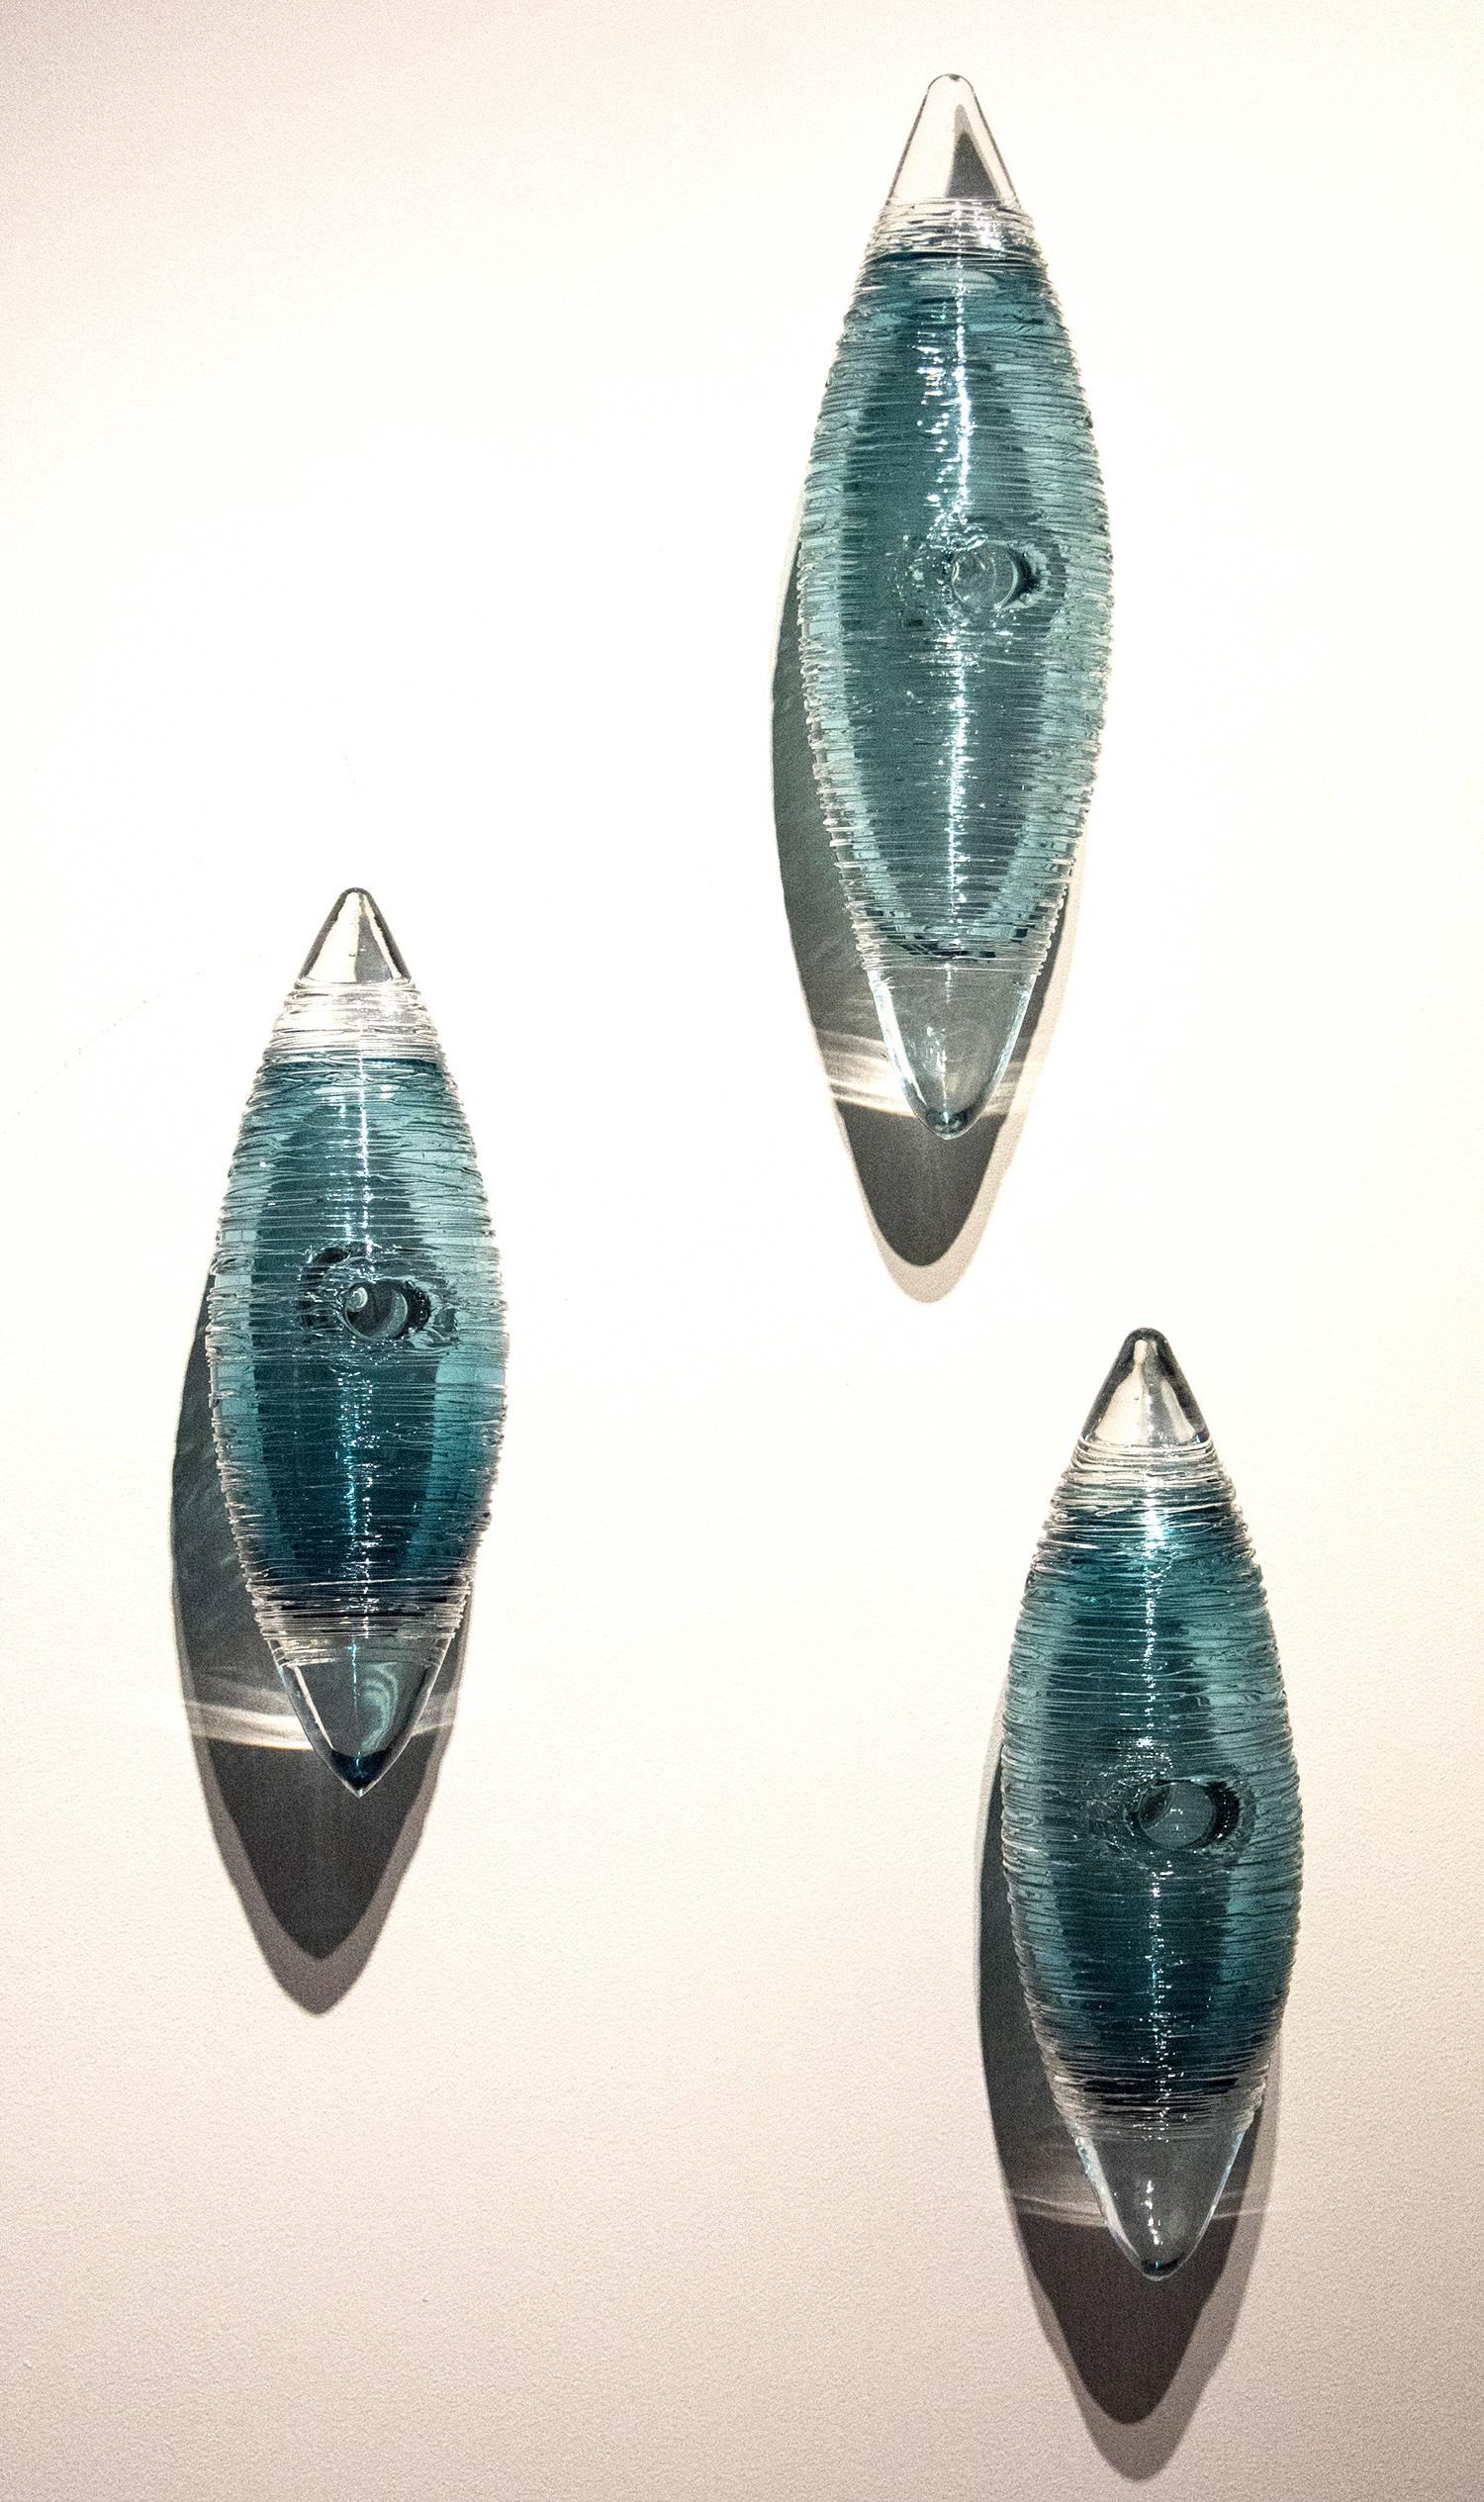 Threads of clear on translucent steel blue glass create shimmering shadows on the wall behind this grouping of three cocoons by Canadian artist Julia Reimer. Each cocoon shape features a central hole, like that of a bird's nest such as the oriole.